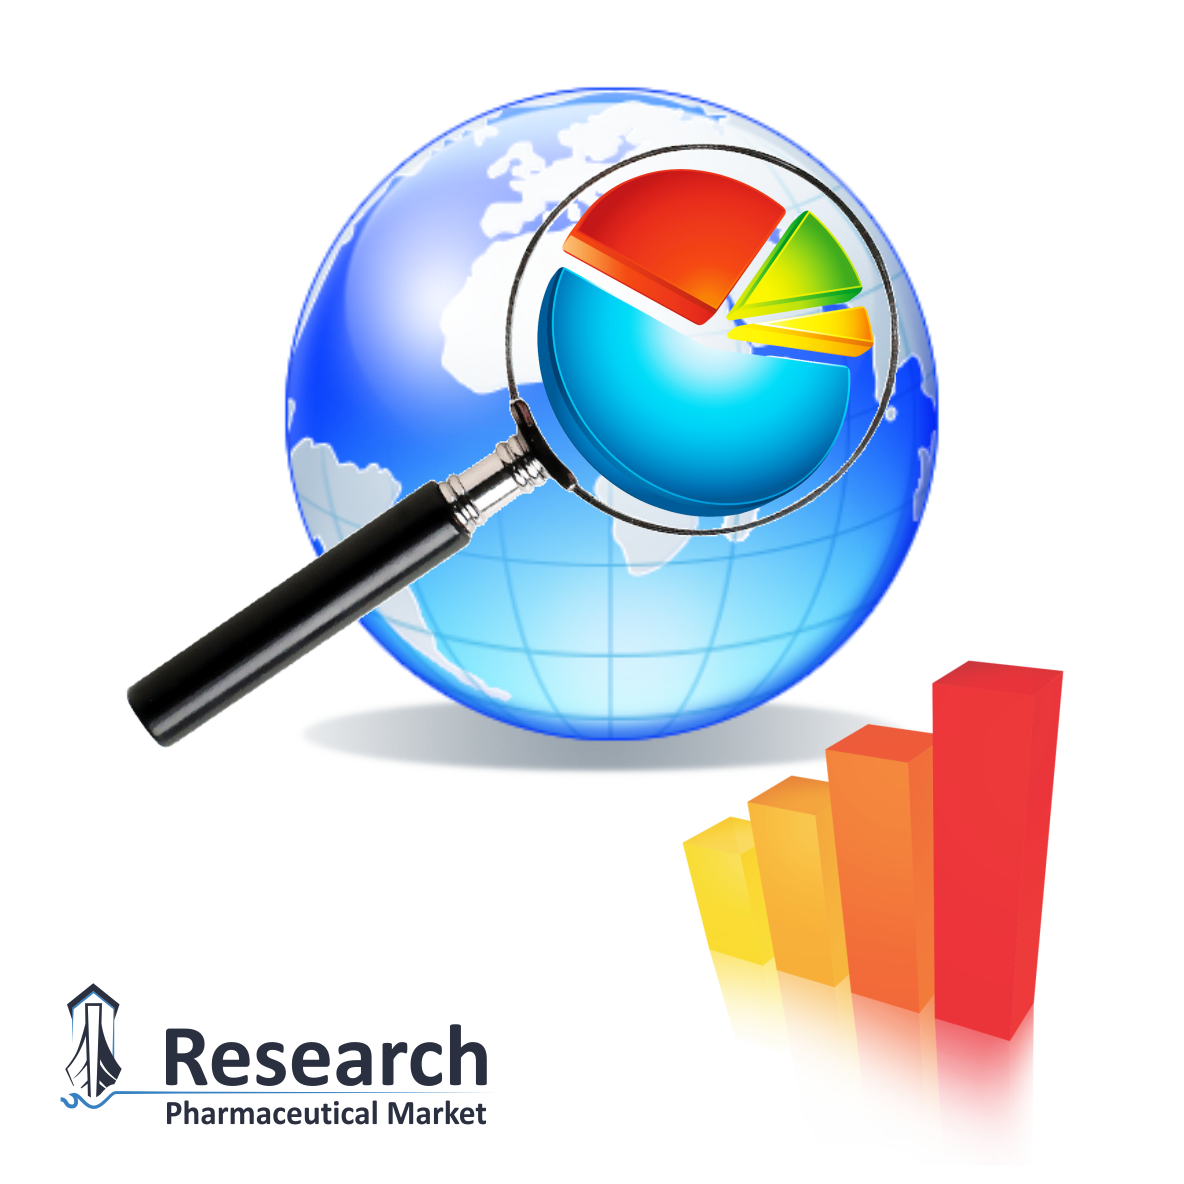 Pharmaceutical Market Research - Market Research (1184x1184)